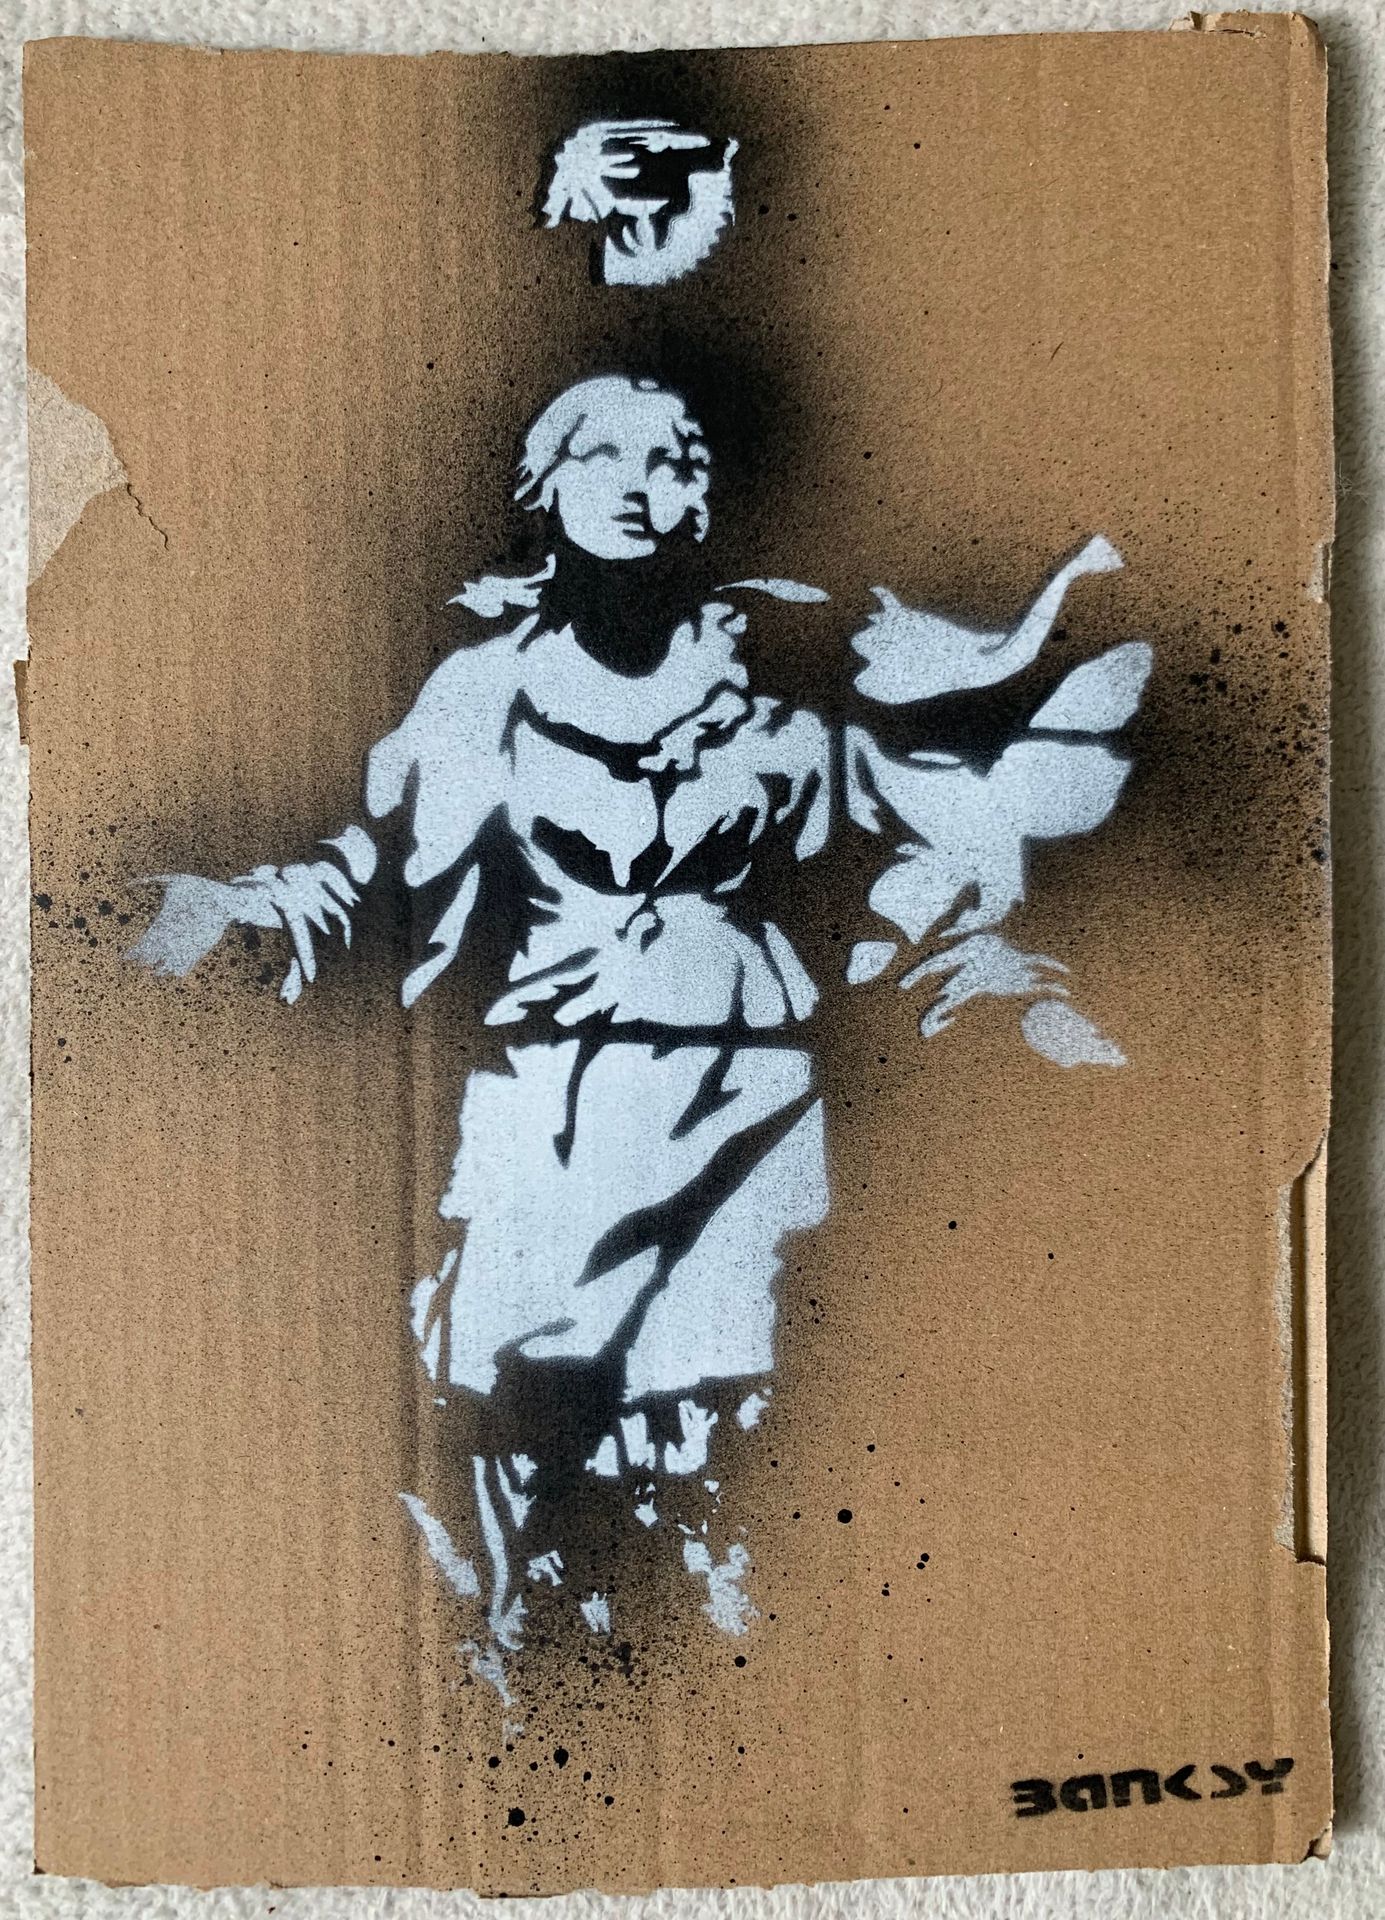 Null Banksy (after) - "Enjoy your free Art" Souvenir of

Dismaland

Aerosol and &hellip;